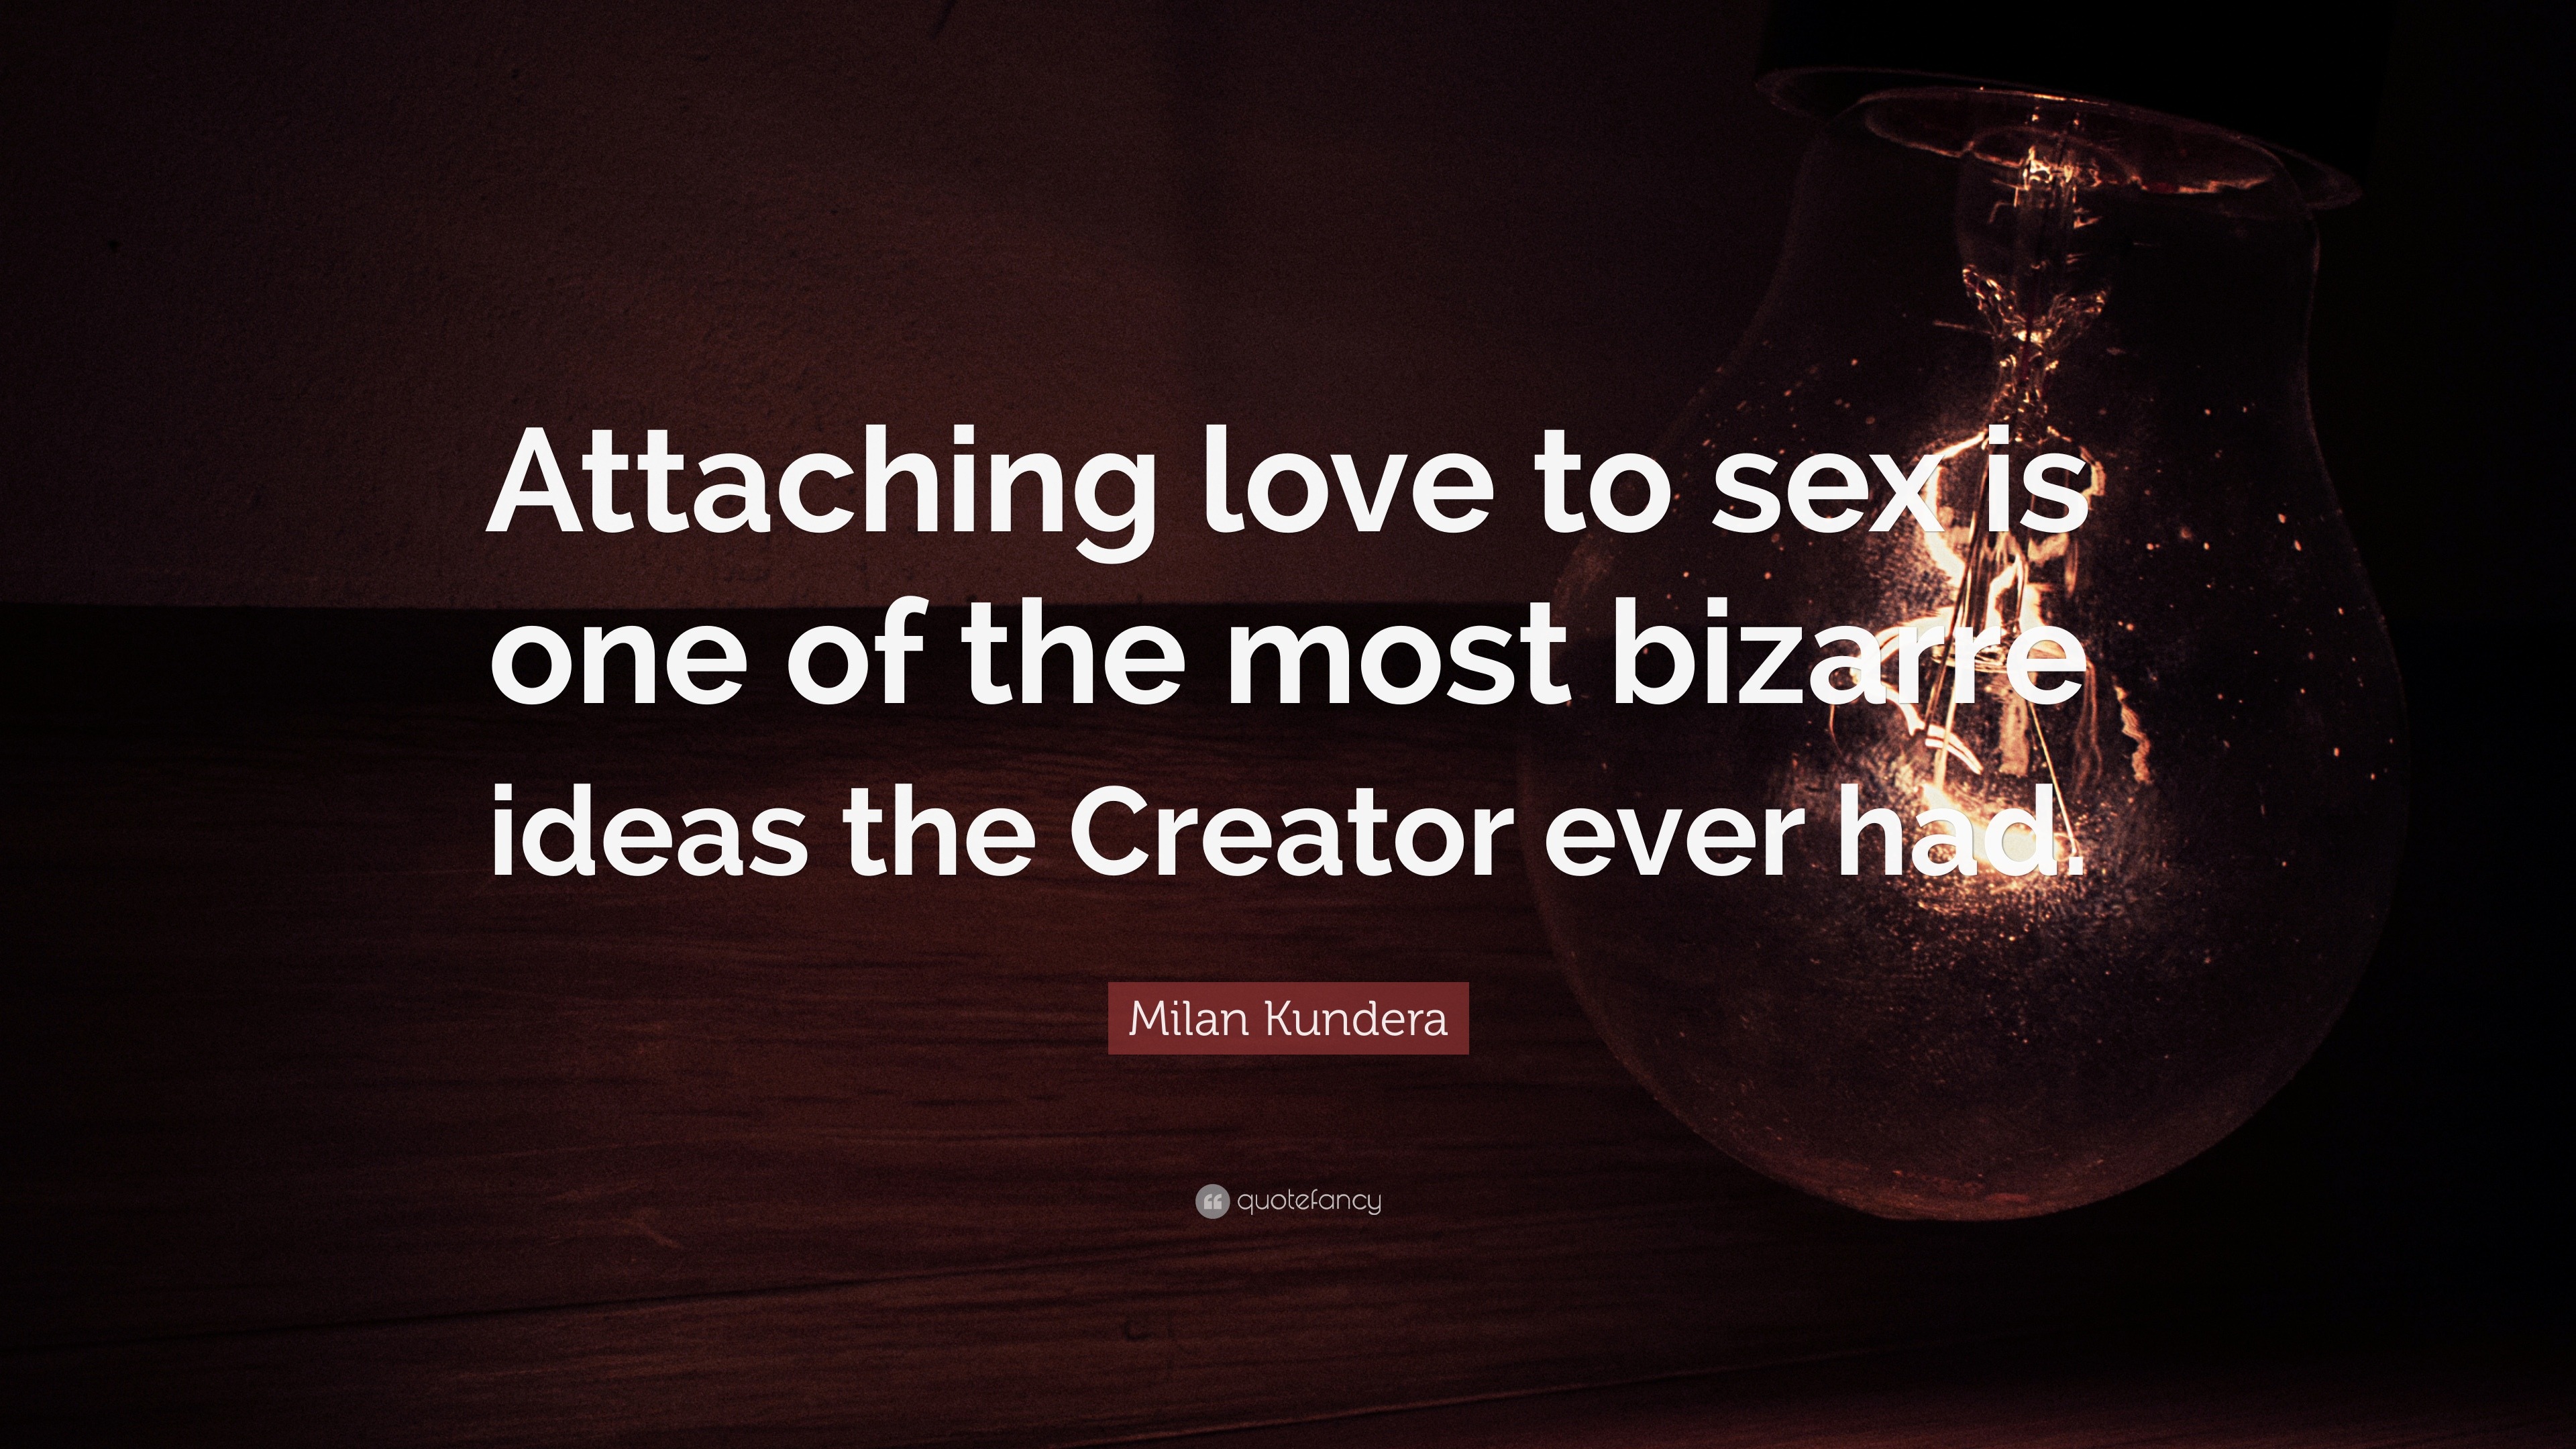 Milan Kundera Quote “Attaching love to is one of the most bizarre ideas